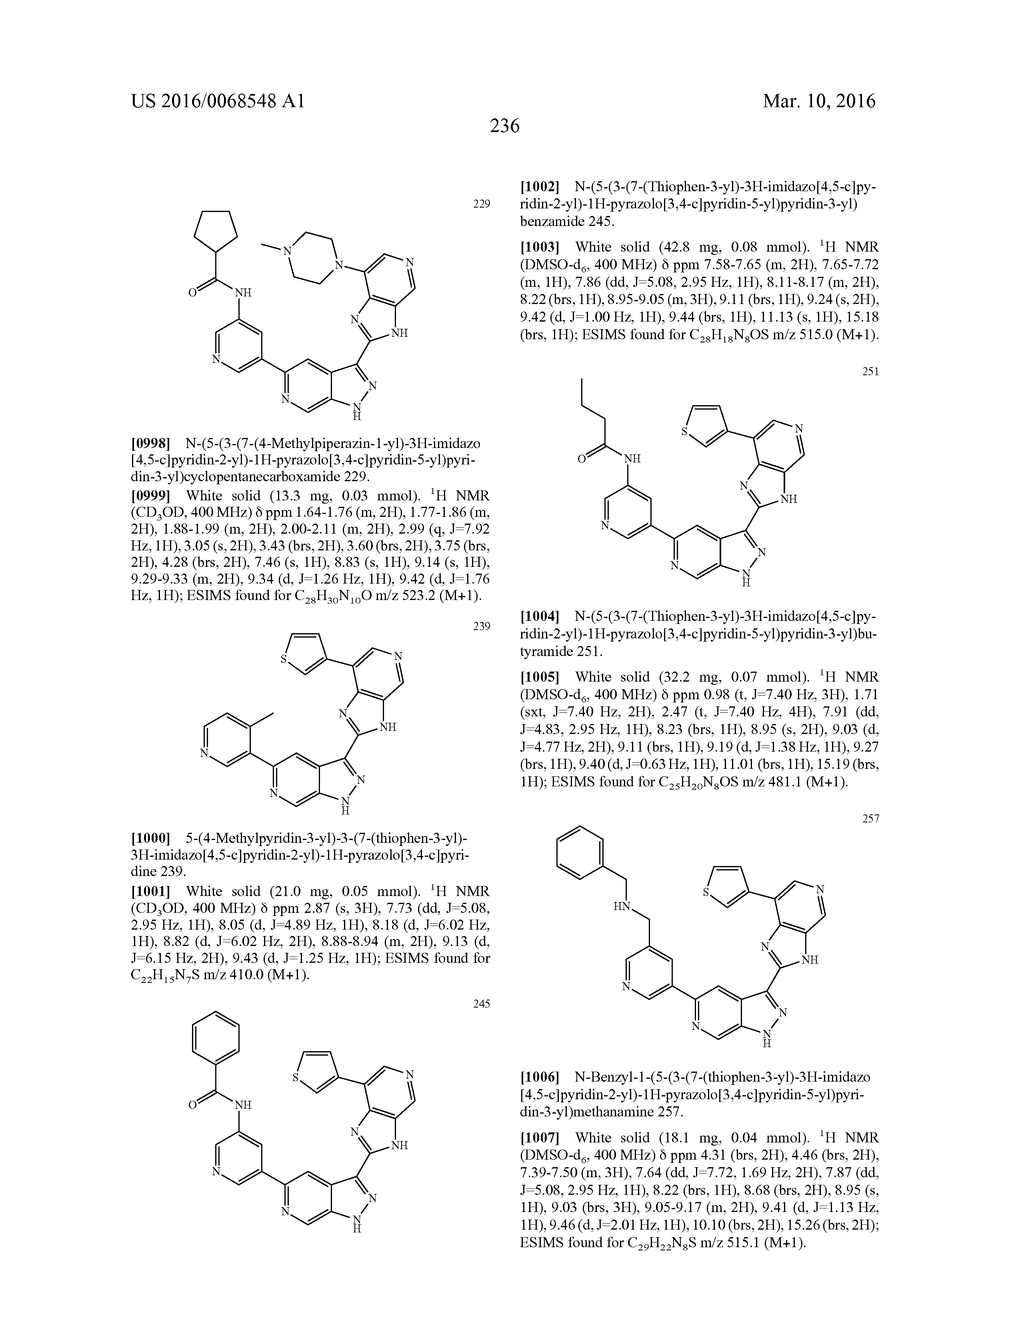 3-(3H-IMIDAZO[4,5-C]PYRIDIN-2-YL)-1H-PYRAZOLO[3,4-C]PYRIDINE AND     THERAPEUTIC USES THEREOF - diagram, schematic, and image 237